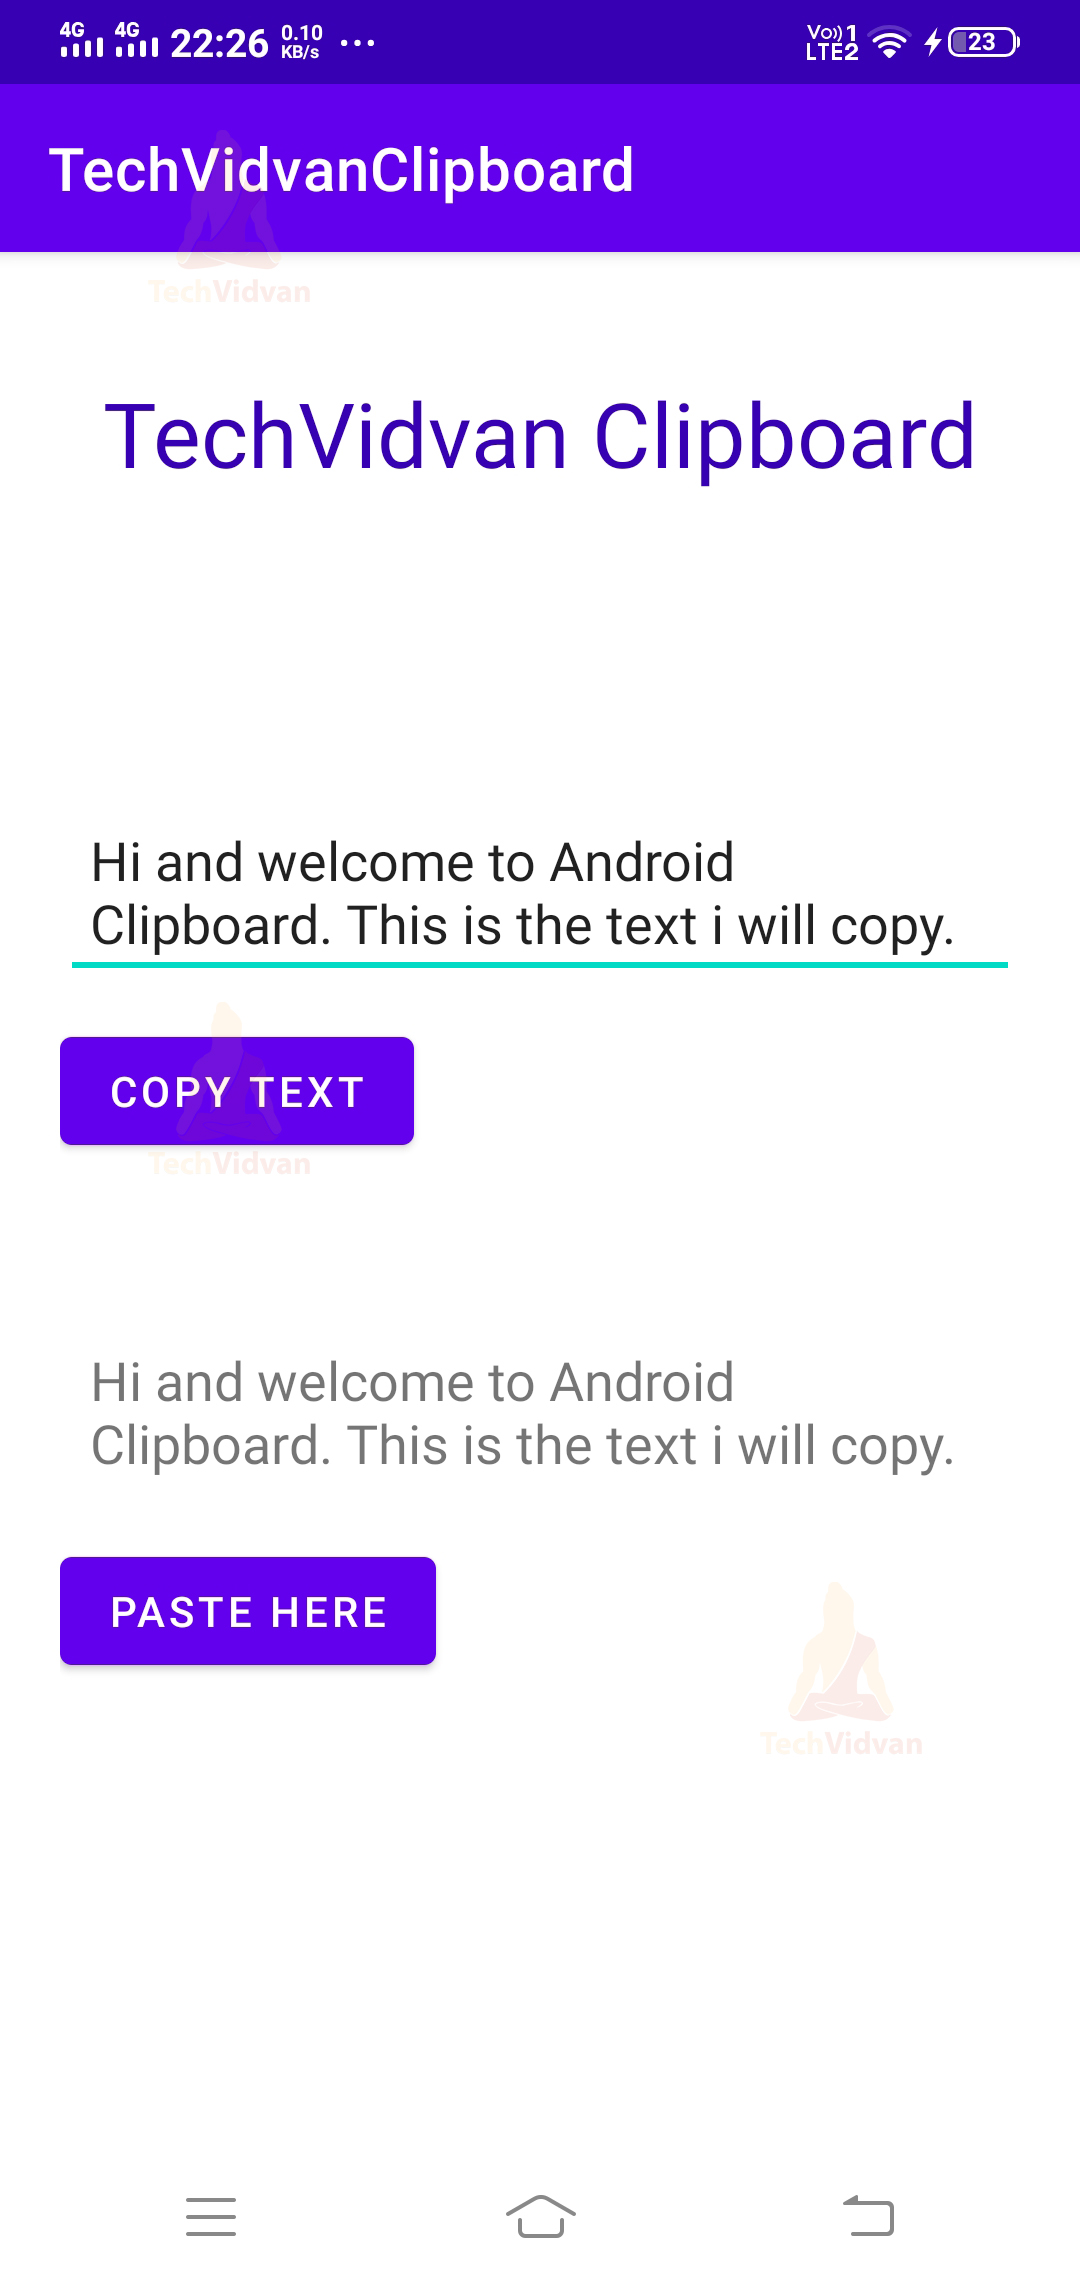 Android Clipboard Architecture And Implementation Techvidvan